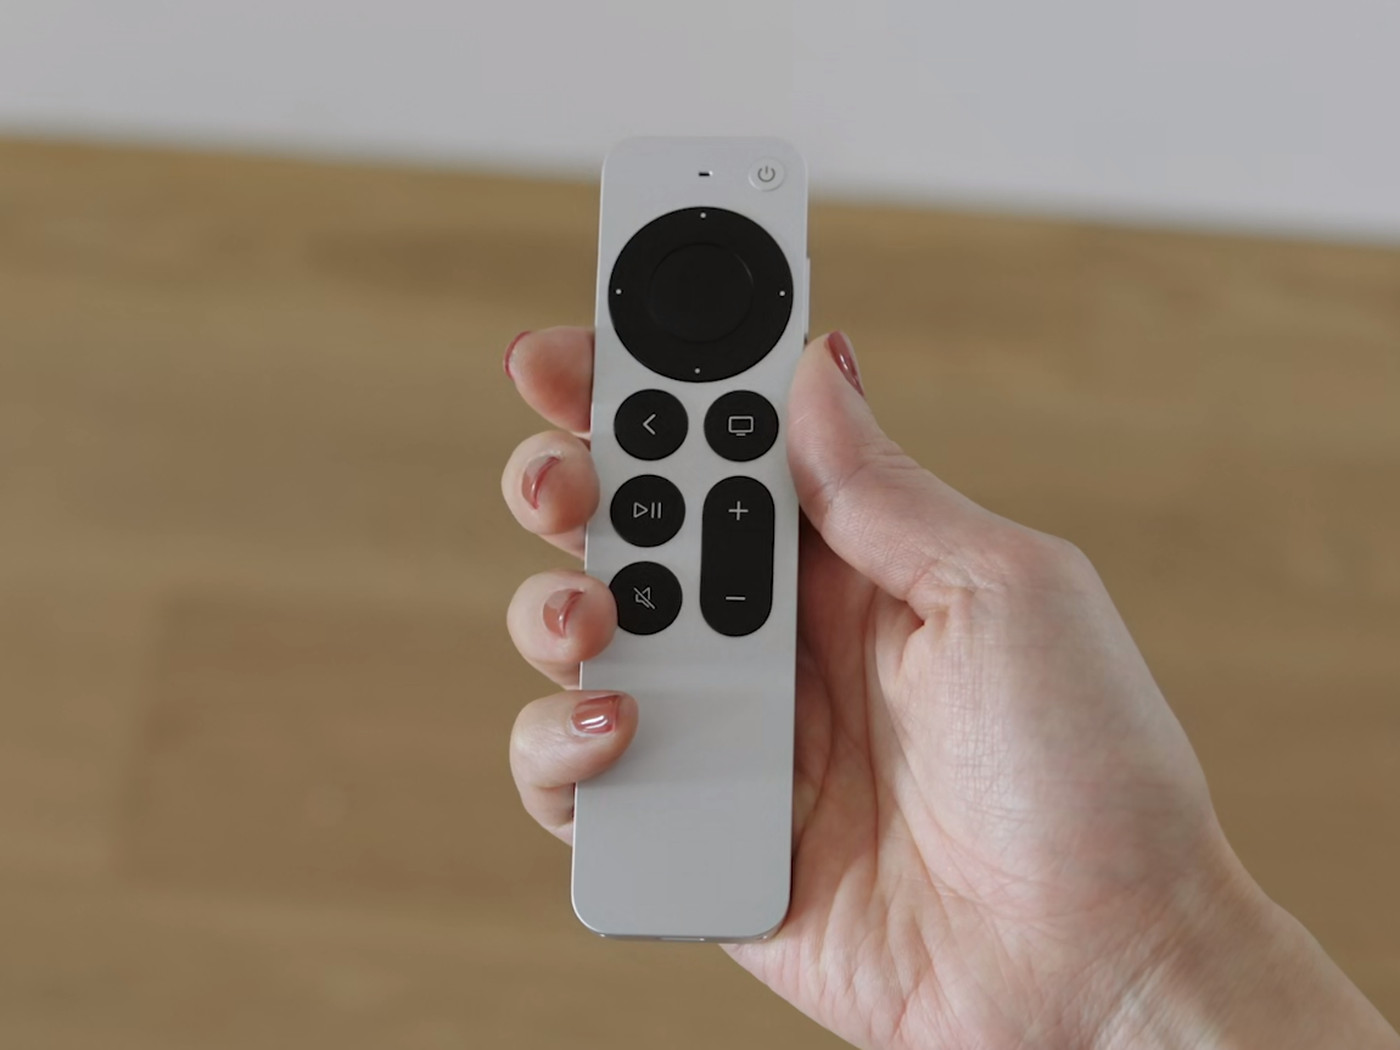 Apple S New 60 Siri Remote Can Be Used With Older Apple Tvs The Verge